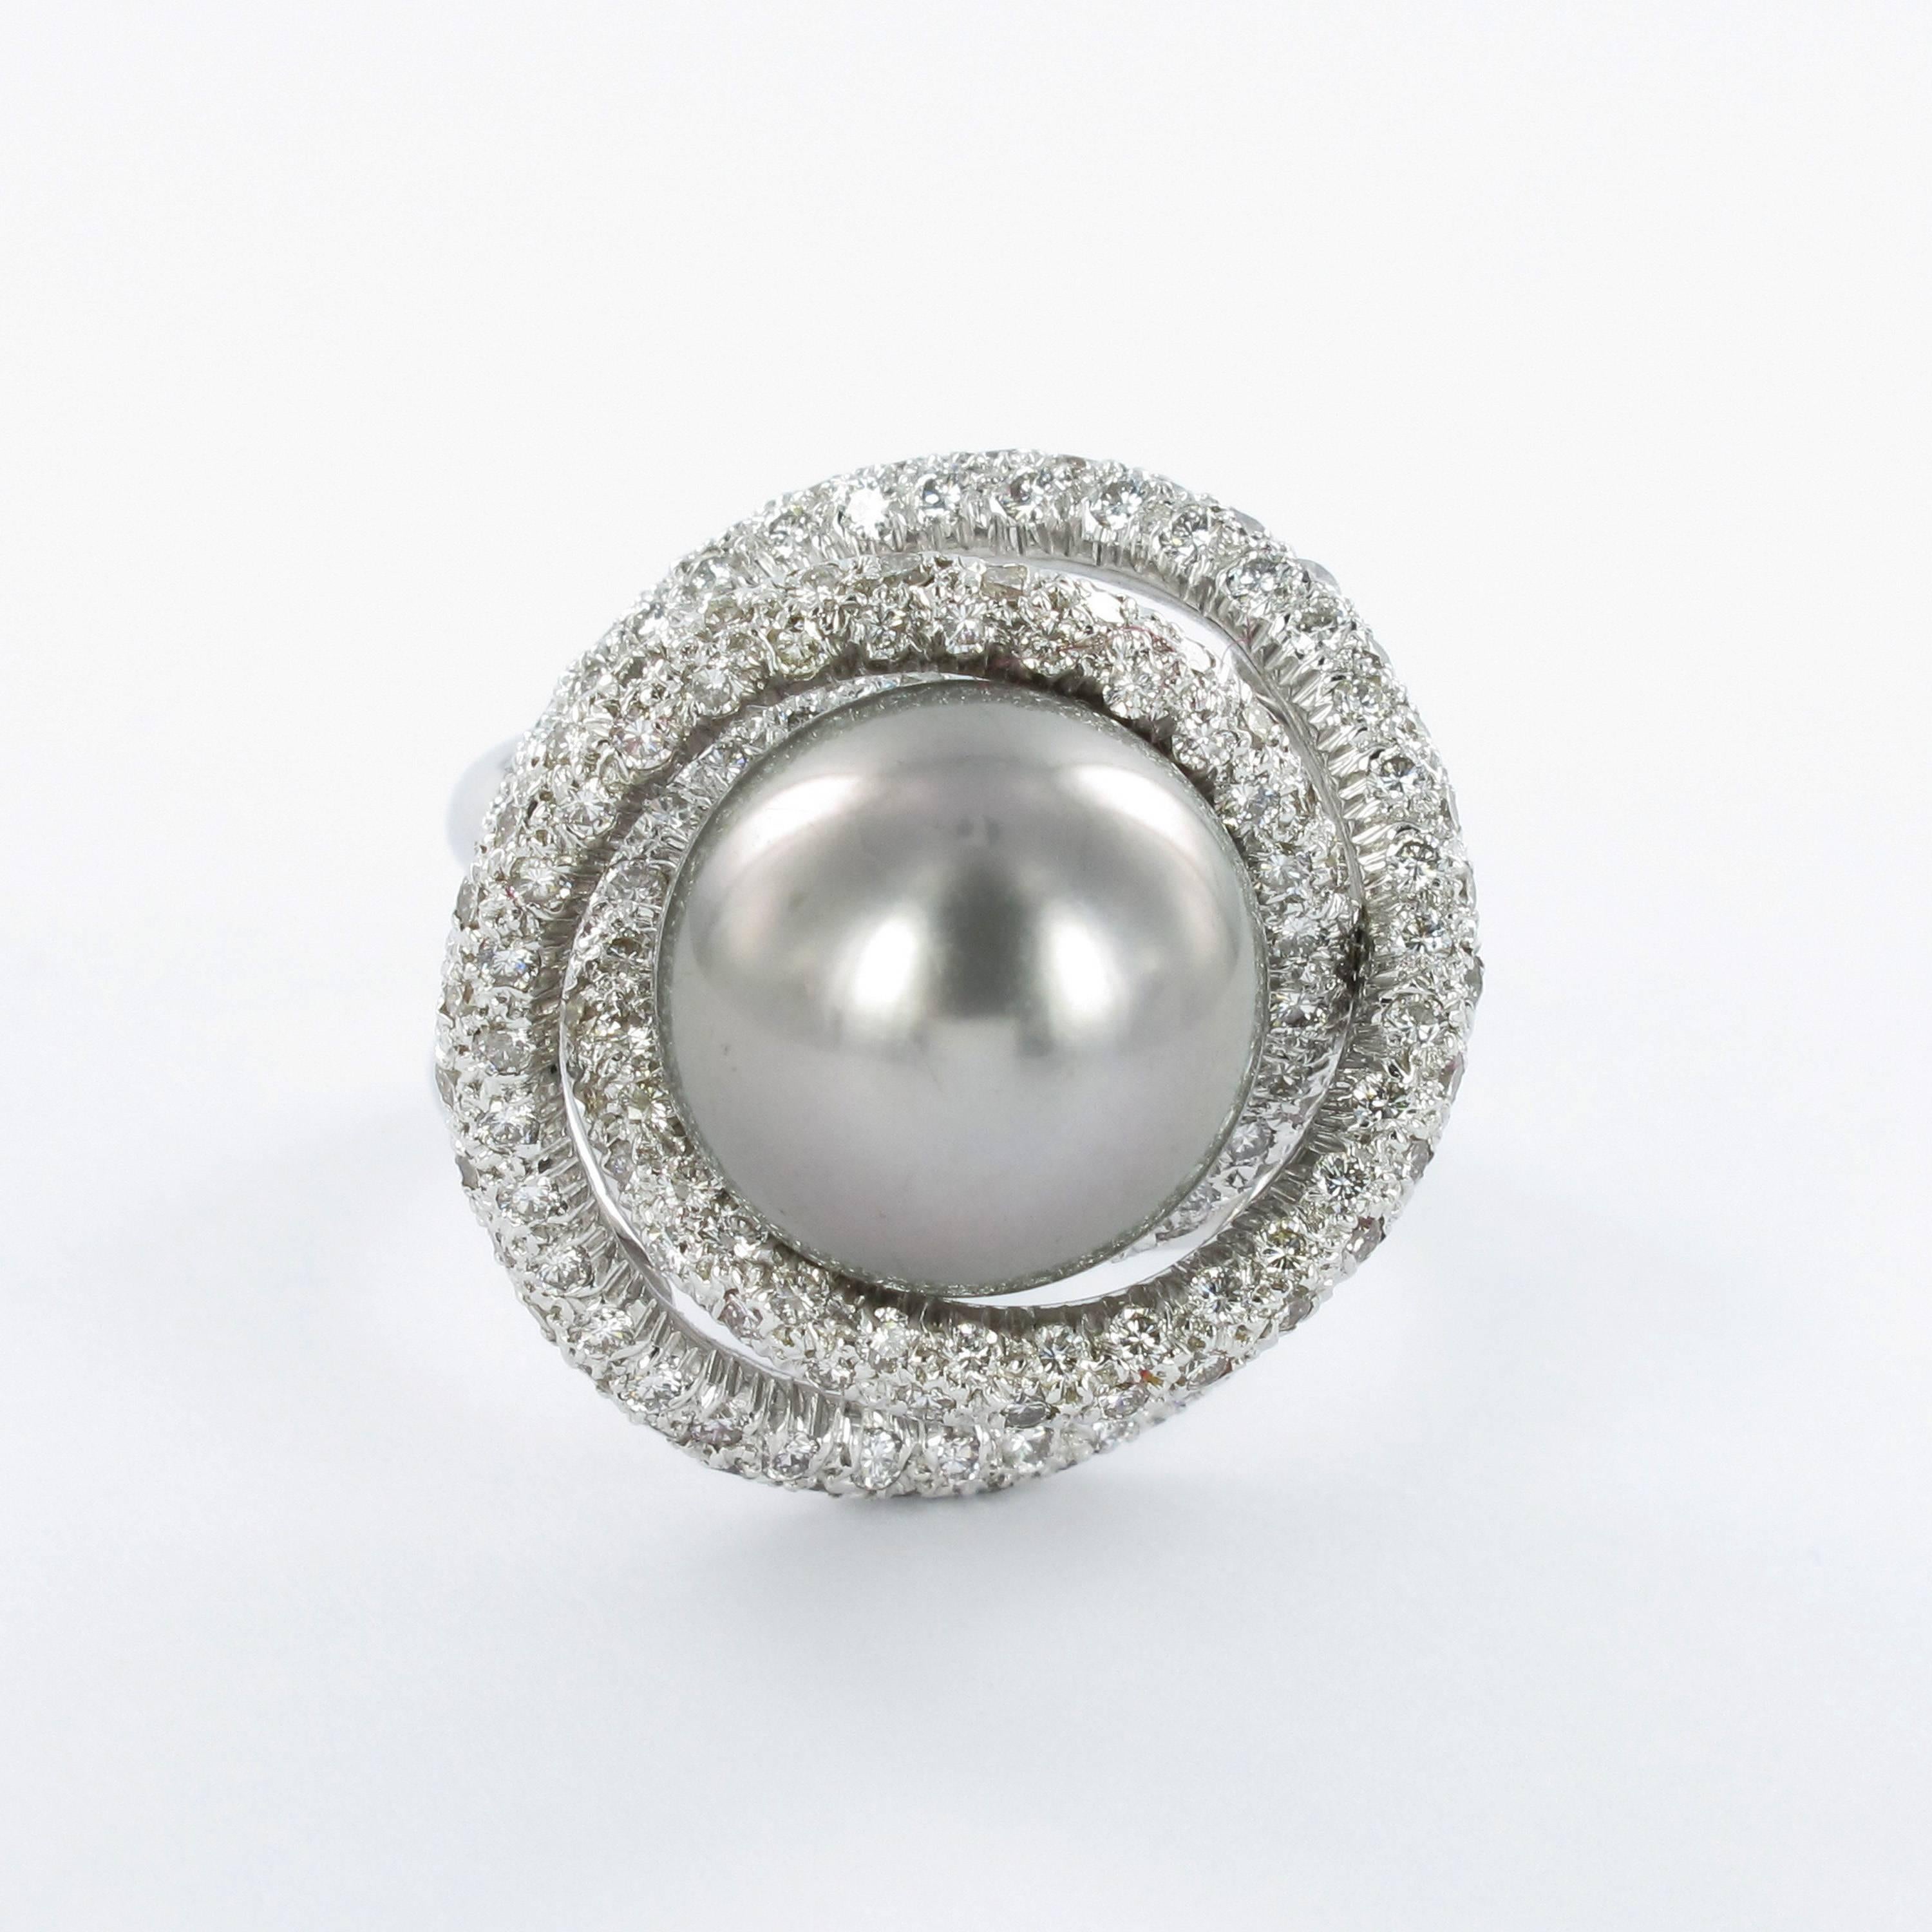 This ring in 18k white gold features a light grey Tahitian cultured pearl of 12.0 mm diameter. The pearl is encircled by 184 delicately set brilliant-cut diamonds. Total diamond weight approximately 0.90 carats (G/H colour and vs clarity). Size: 52,